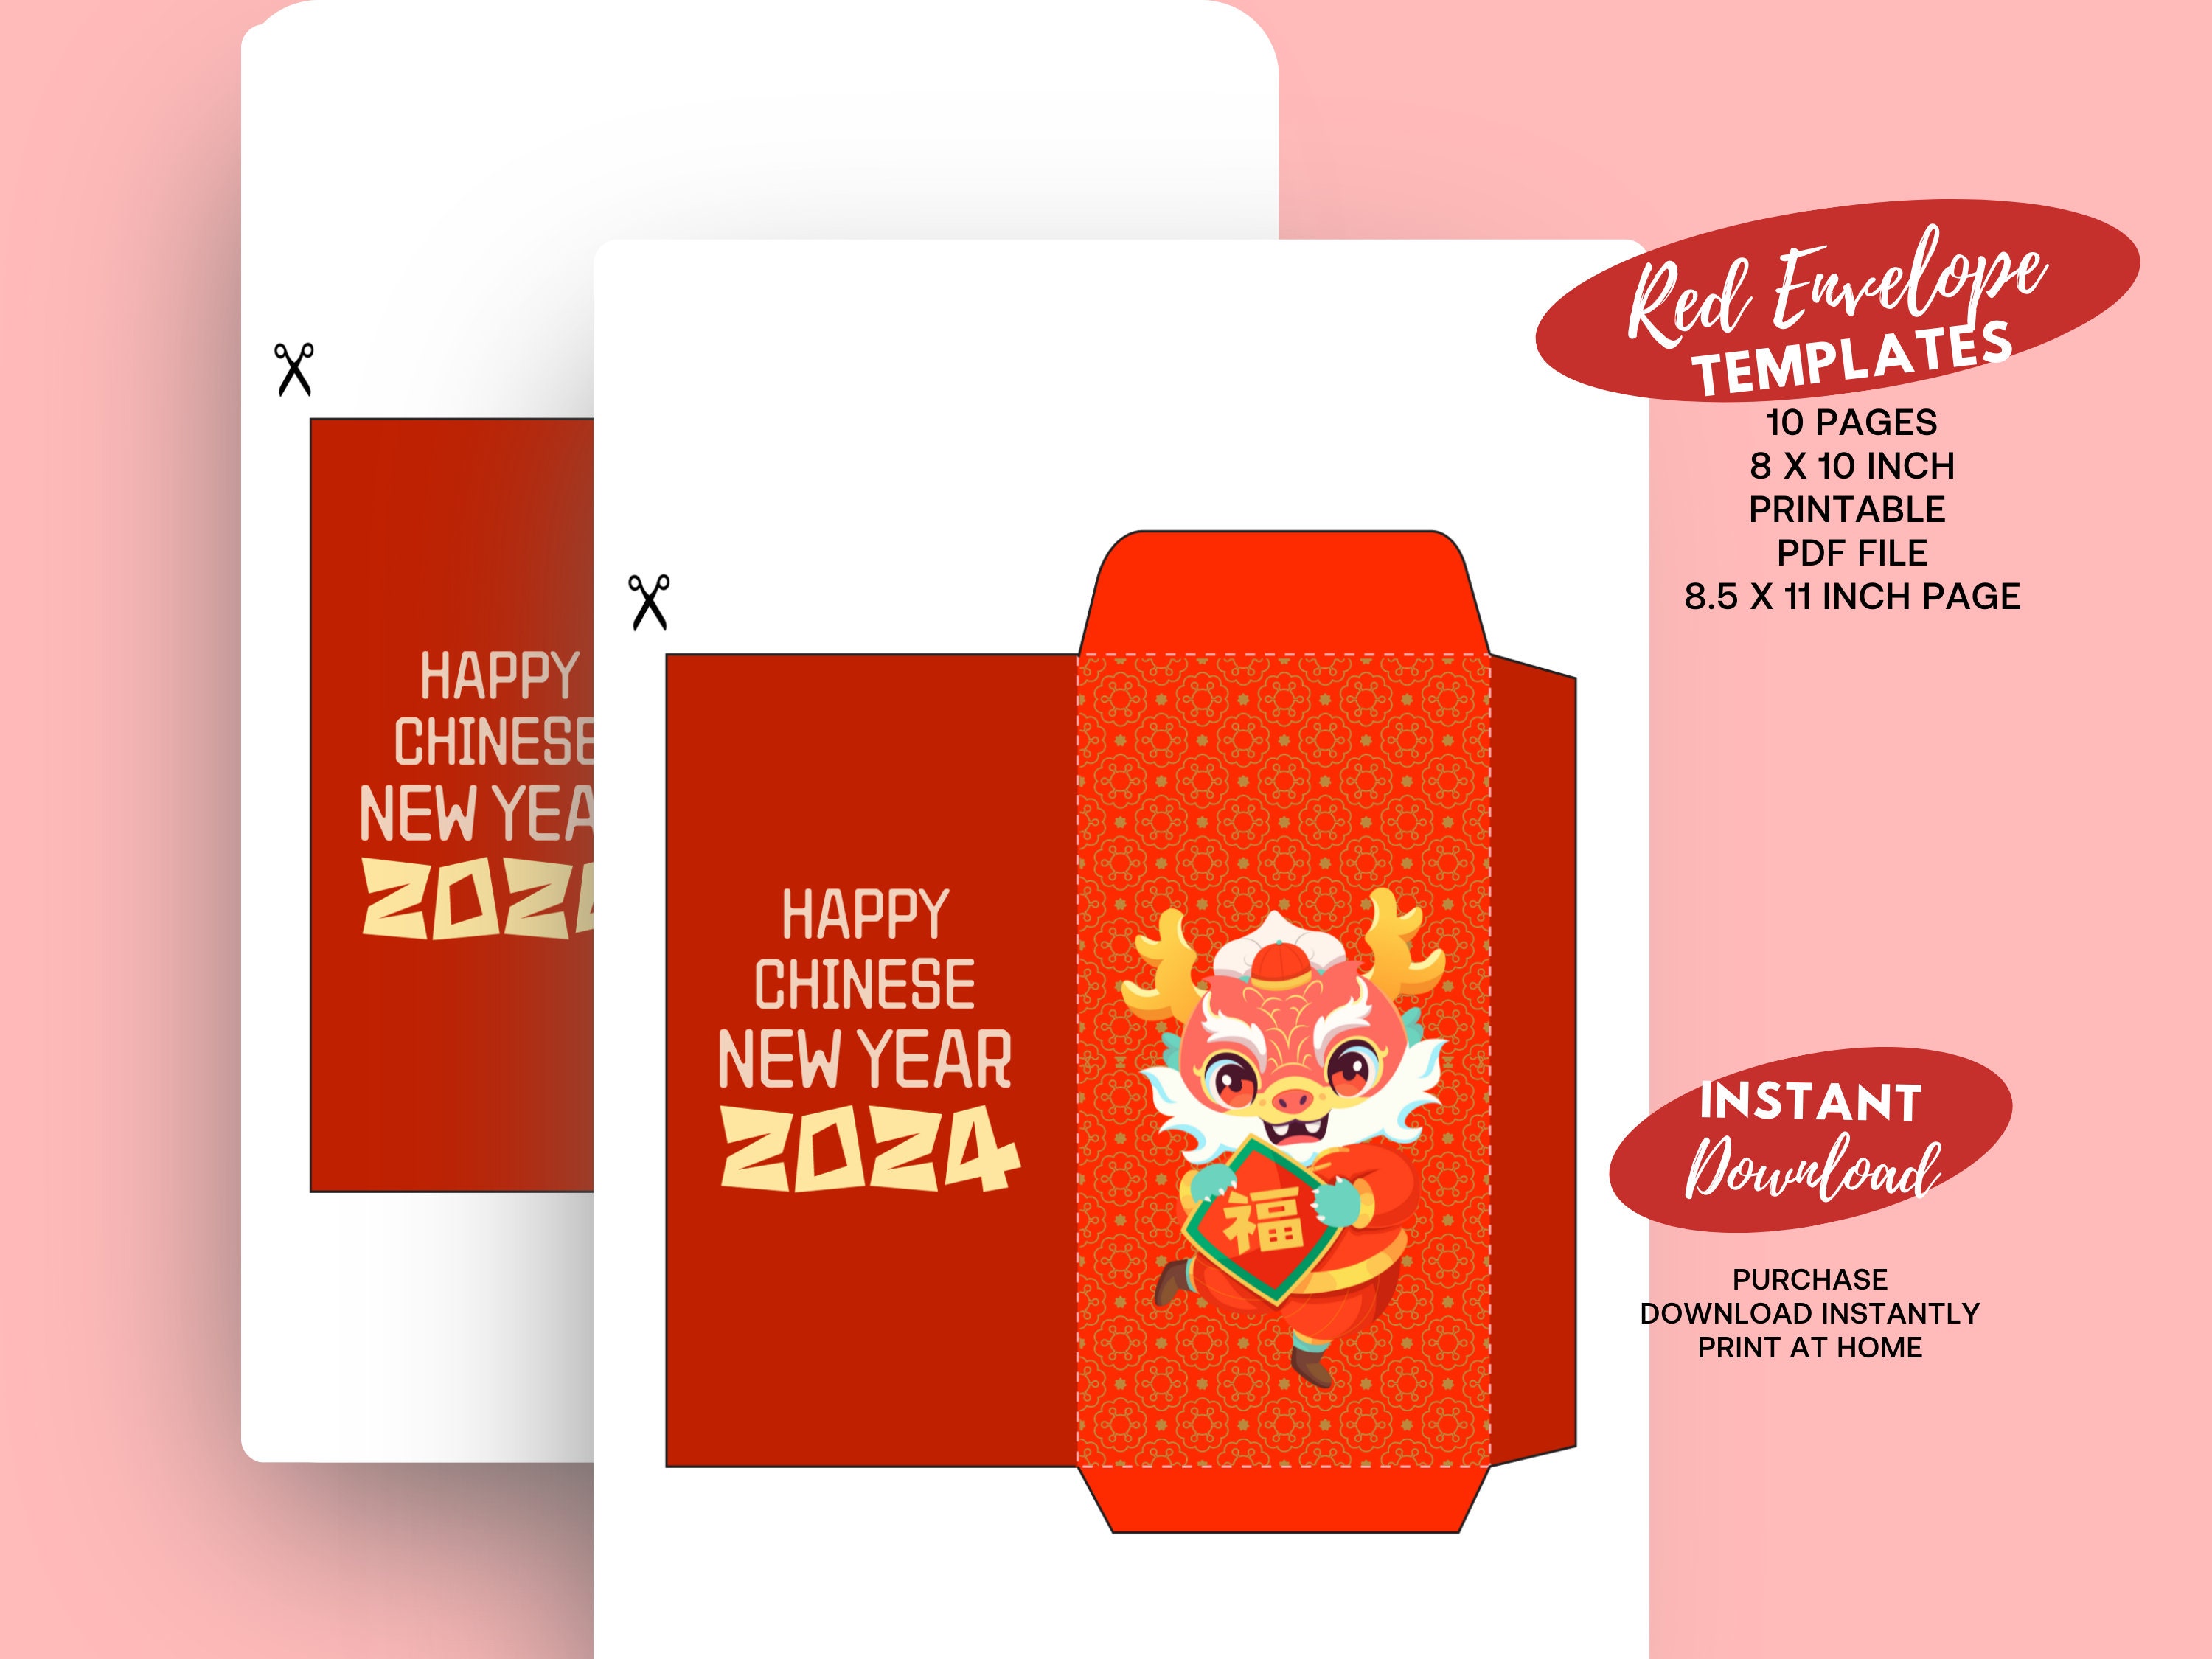 Printable Tet New Year 2024 Red Envelope, Lunar New Year 2024, Vietnamese  New Year, Year of the Dragon, Lucky Money Envelopes 